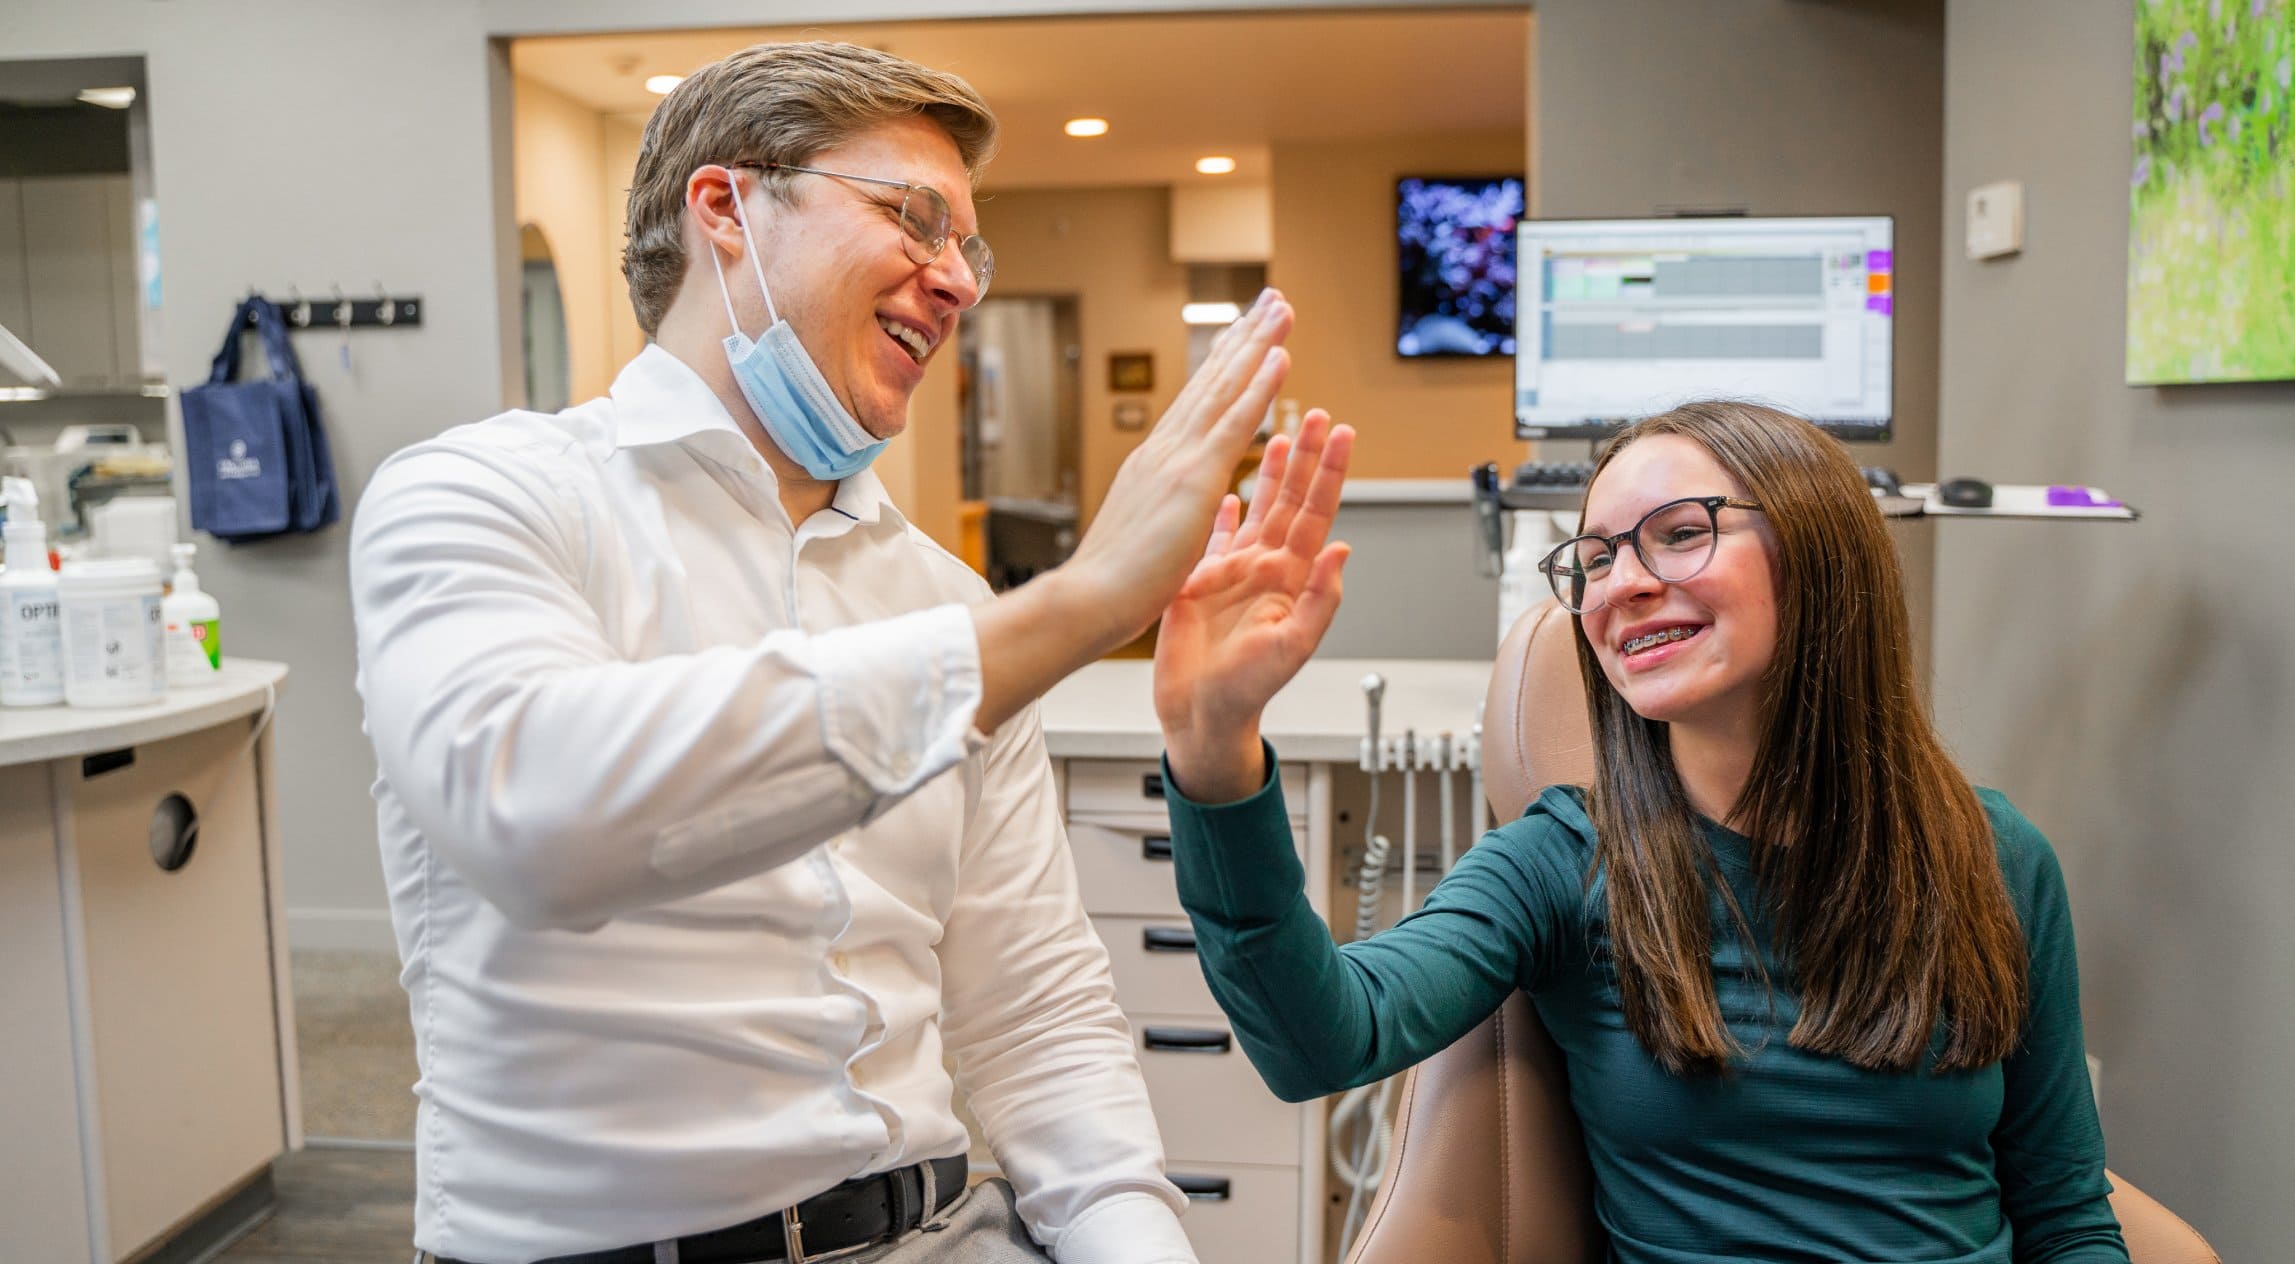 Dr. Adam and teen patient high fiving